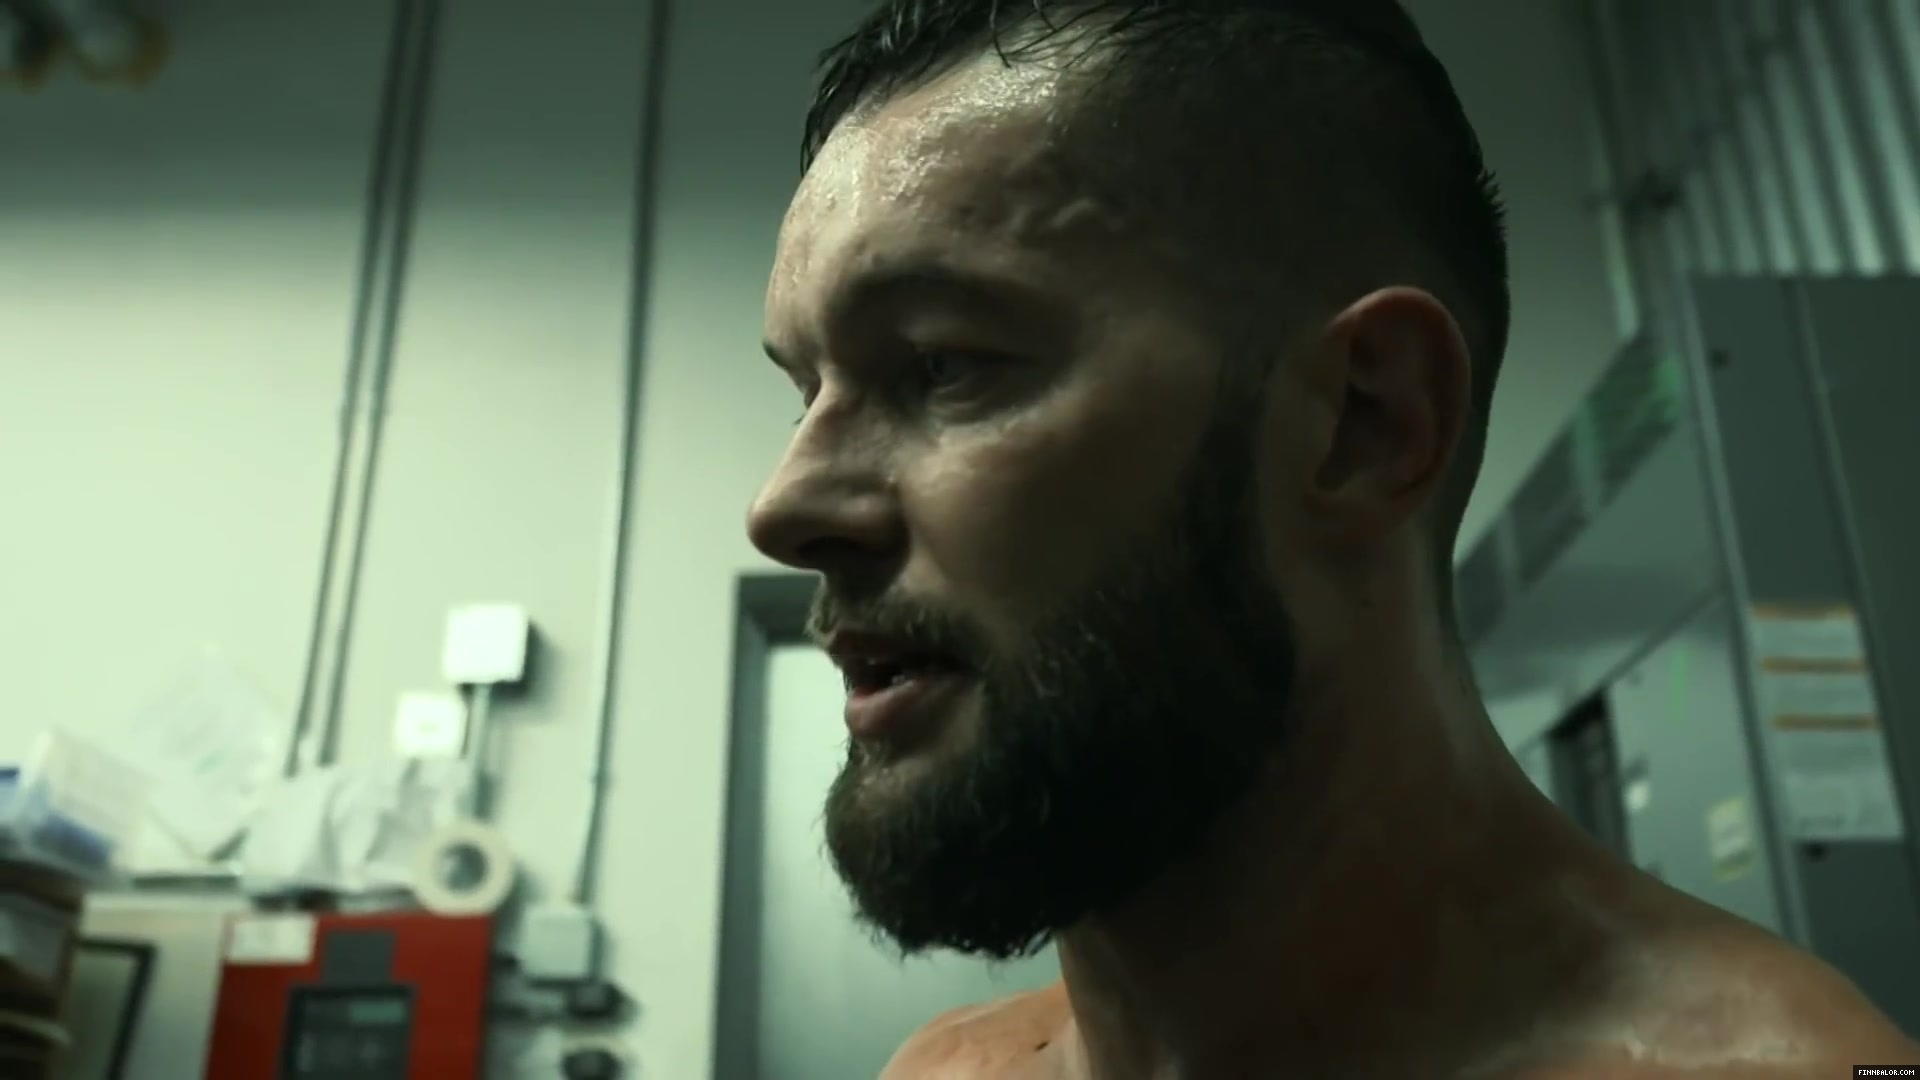 Finn_Balor___The_Rising_of_the_Prince_in_NXT_259.jpg